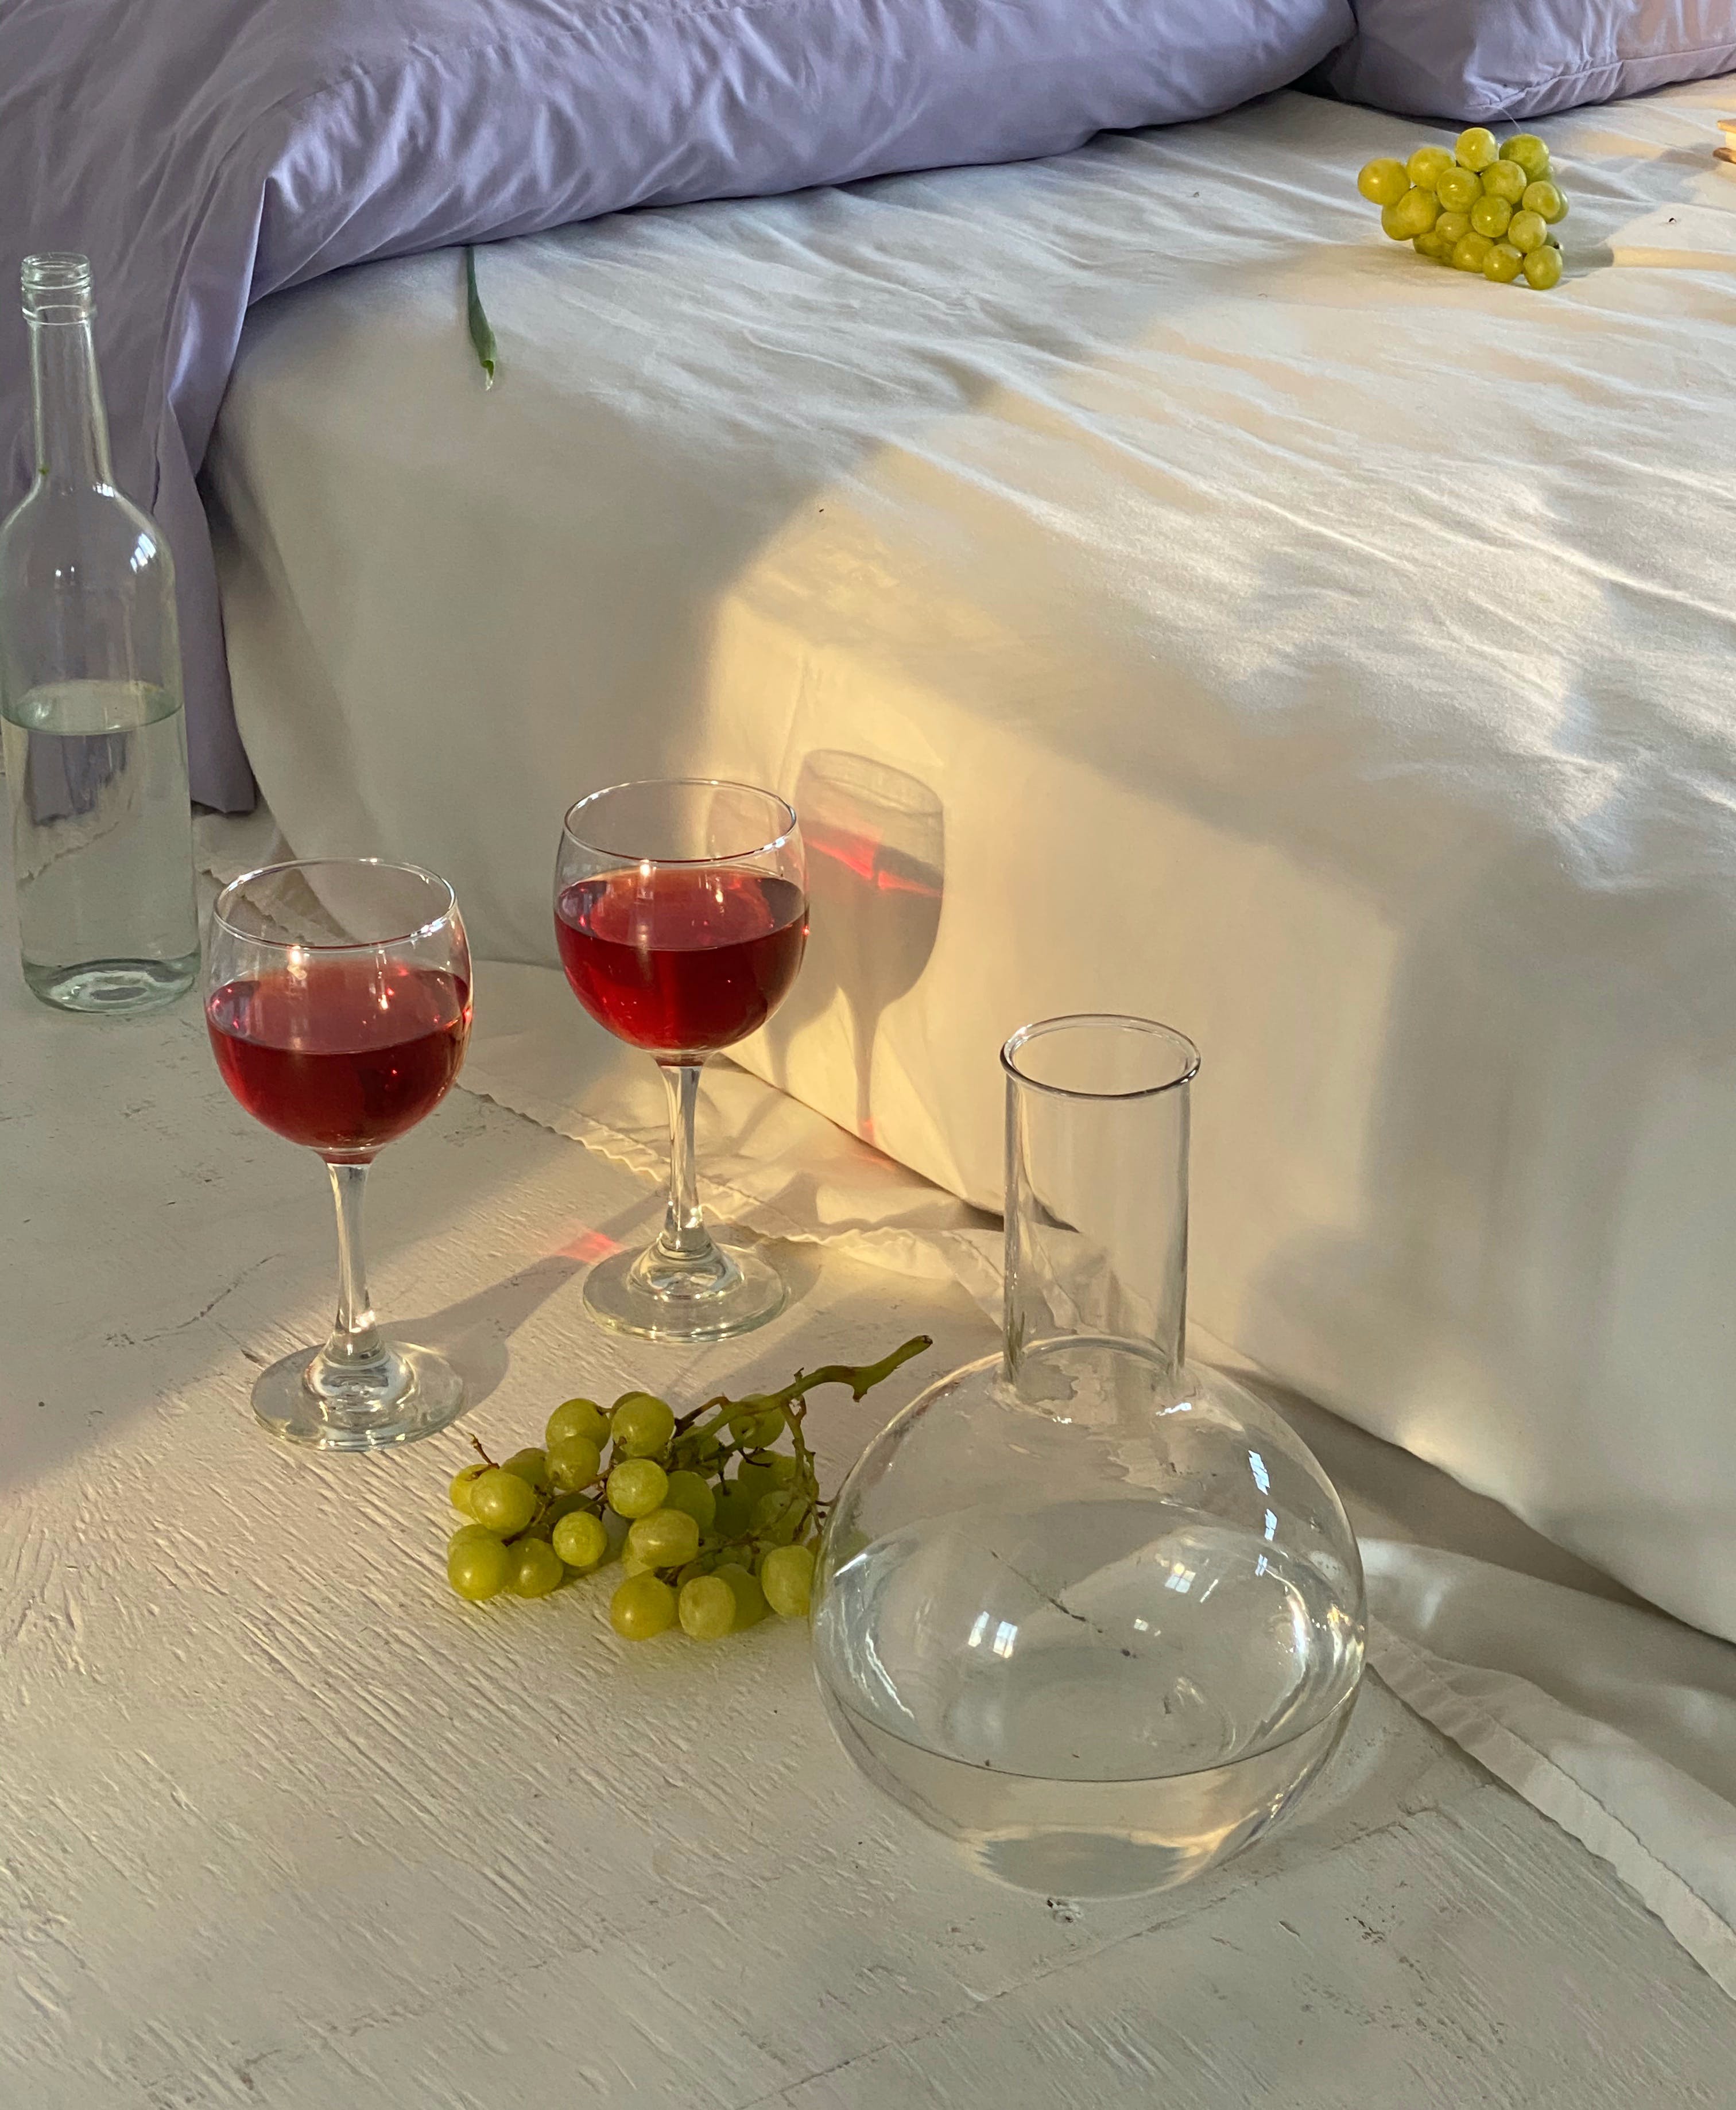 Water Can Enhance Or Ruin The Wine Tasting Experience! Learn To Pair Wine & Water Perfectly